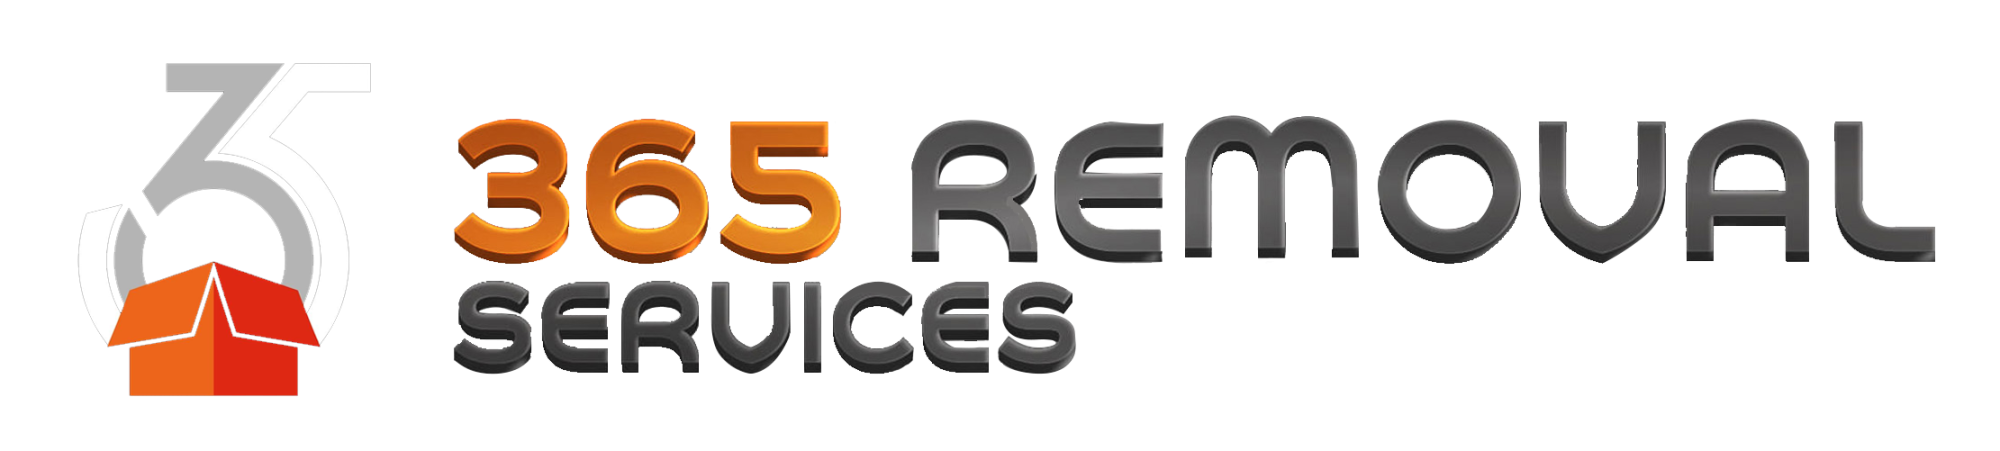 365 Removal Services logo